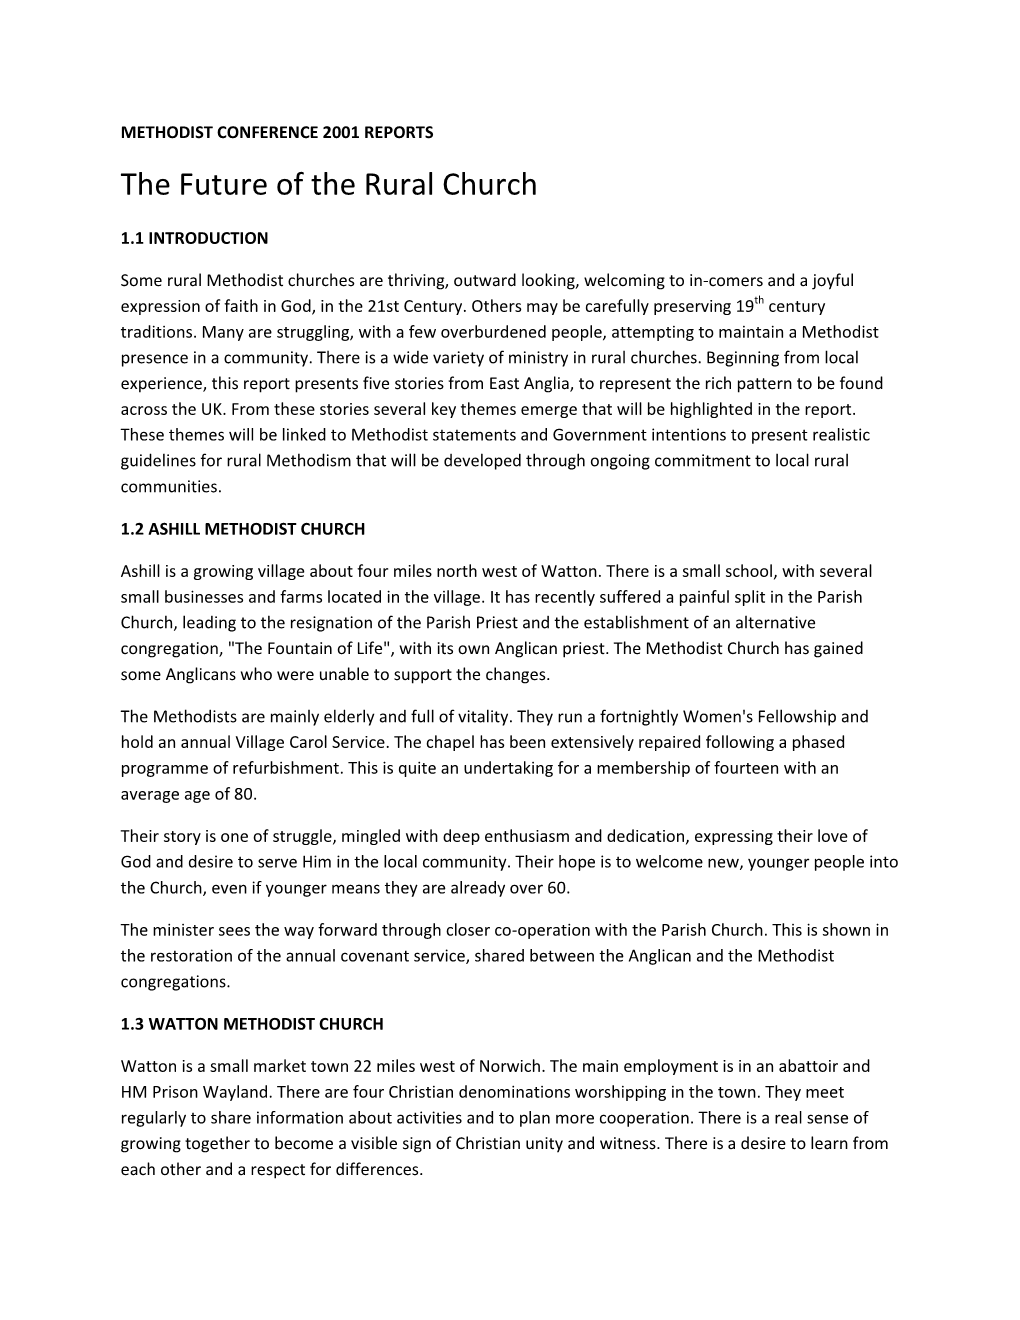 The Future of the Rural Church